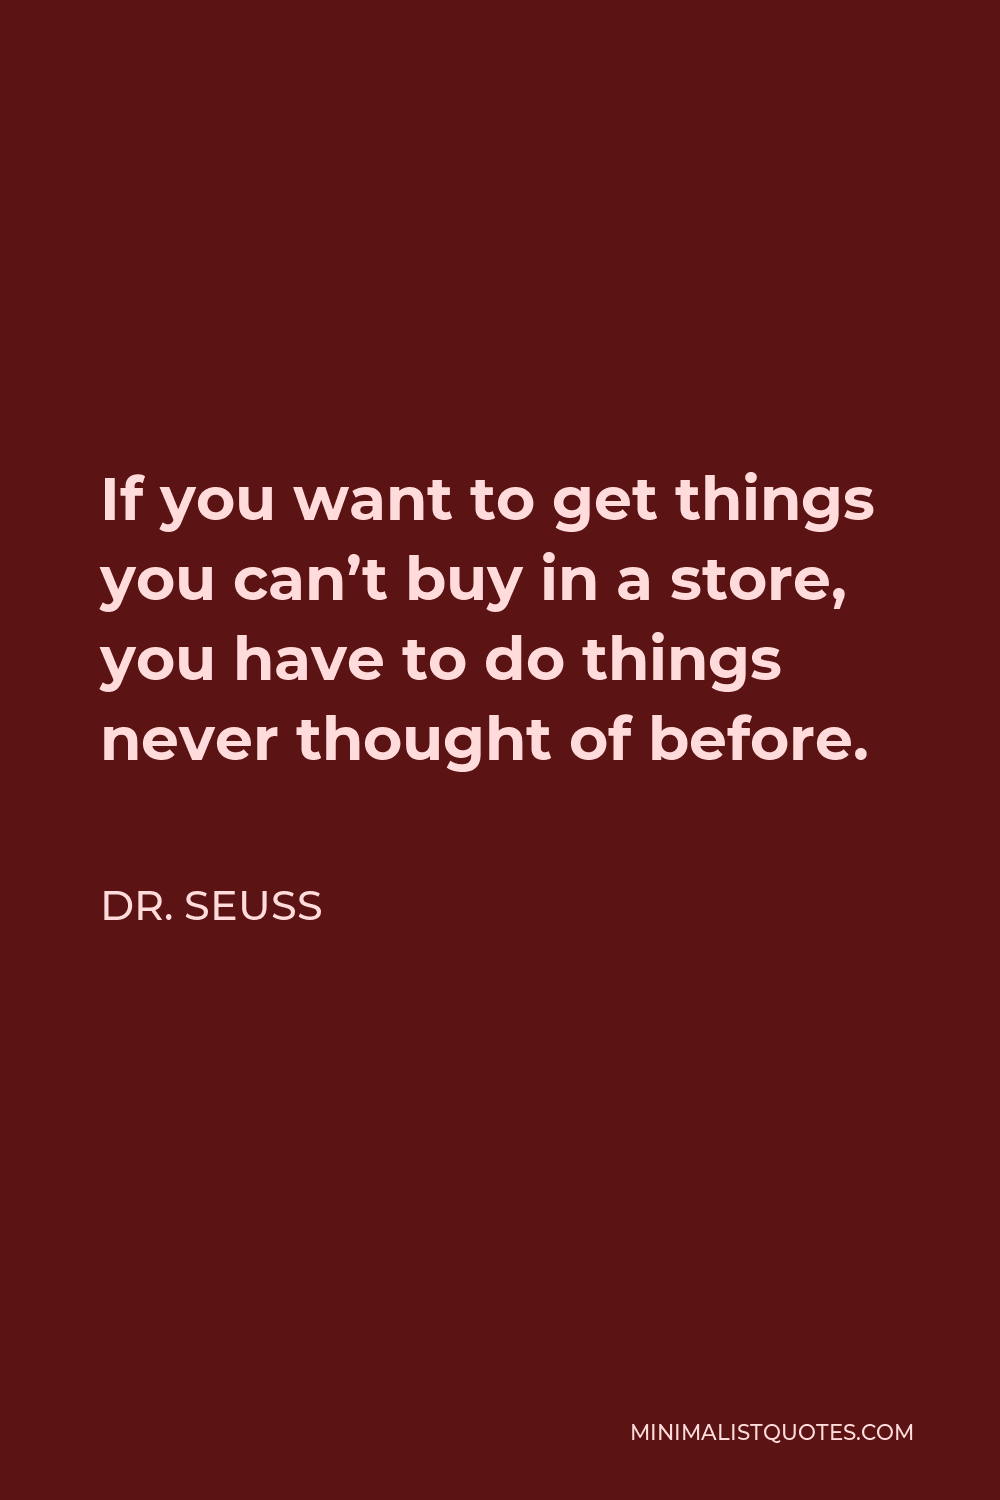 Dr. Seuss Quote - If you want to get things you can’t buy in a store, you have to do things never thought of before.